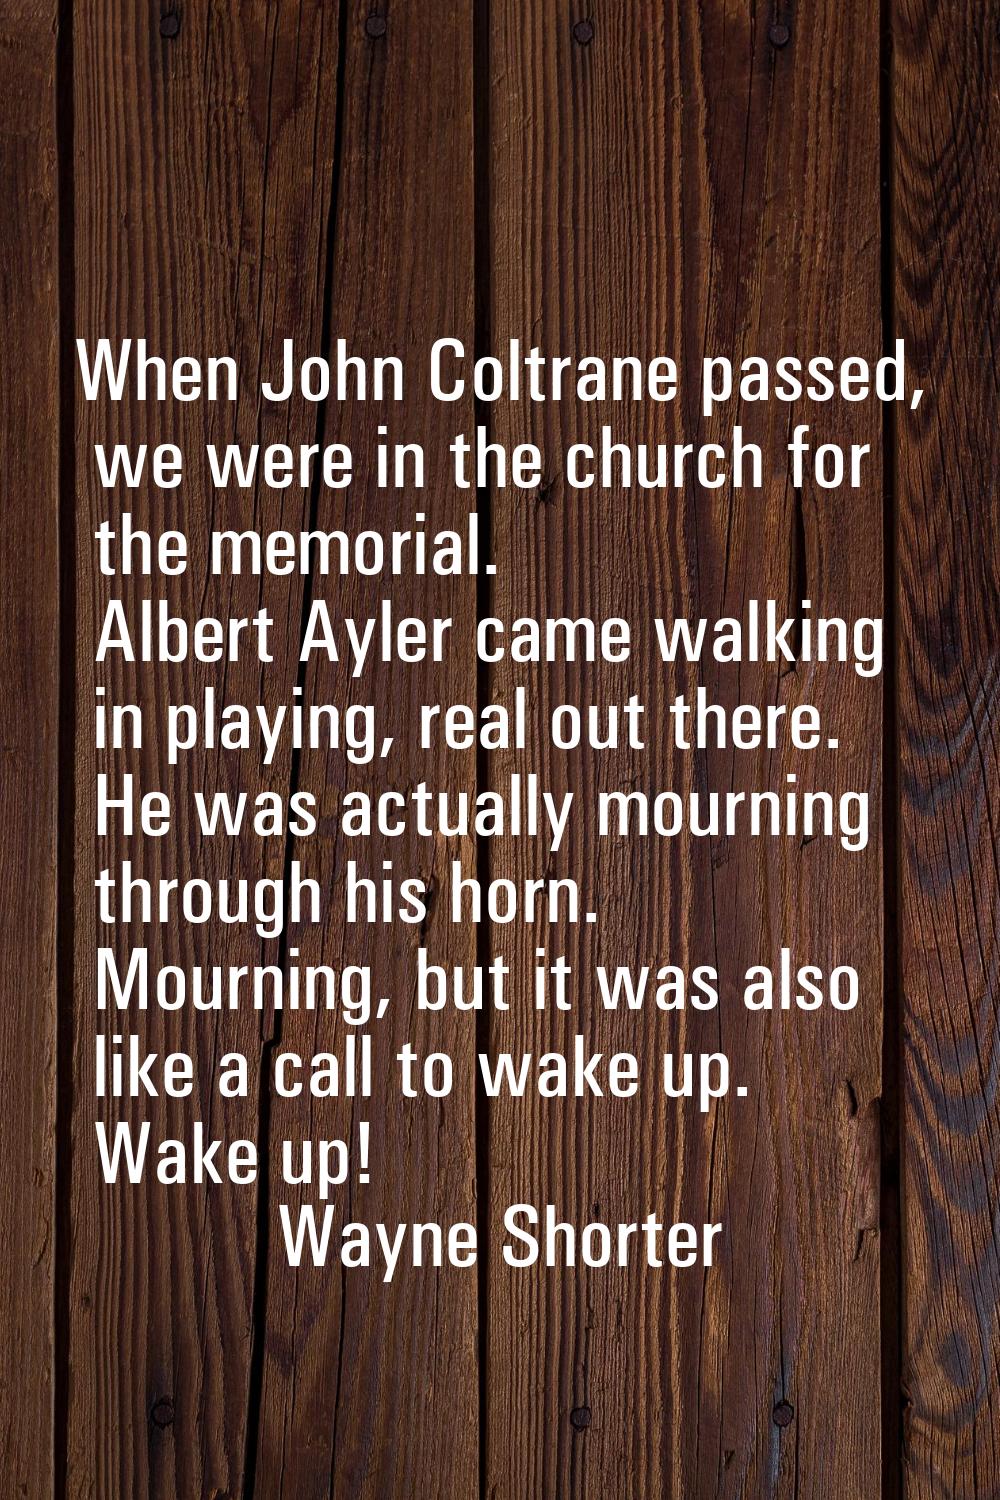 When John Coltrane passed, we were in the church for the memorial. Albert Ayler came walking in pla